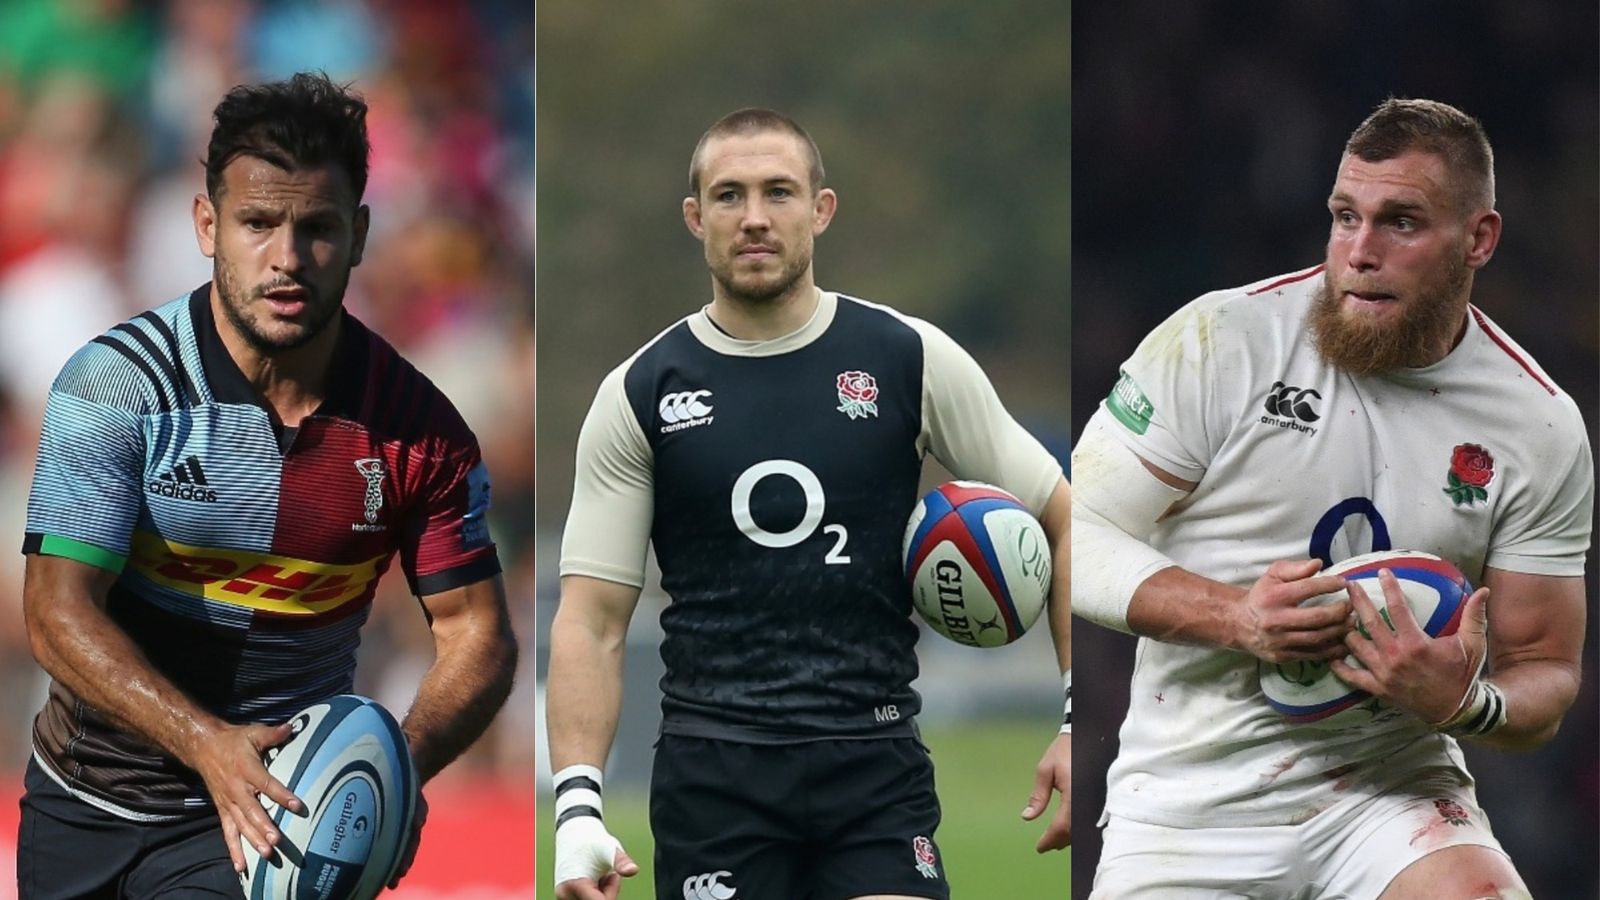 England 2019 Six Nations squad: The winners and losers | Rugby Union